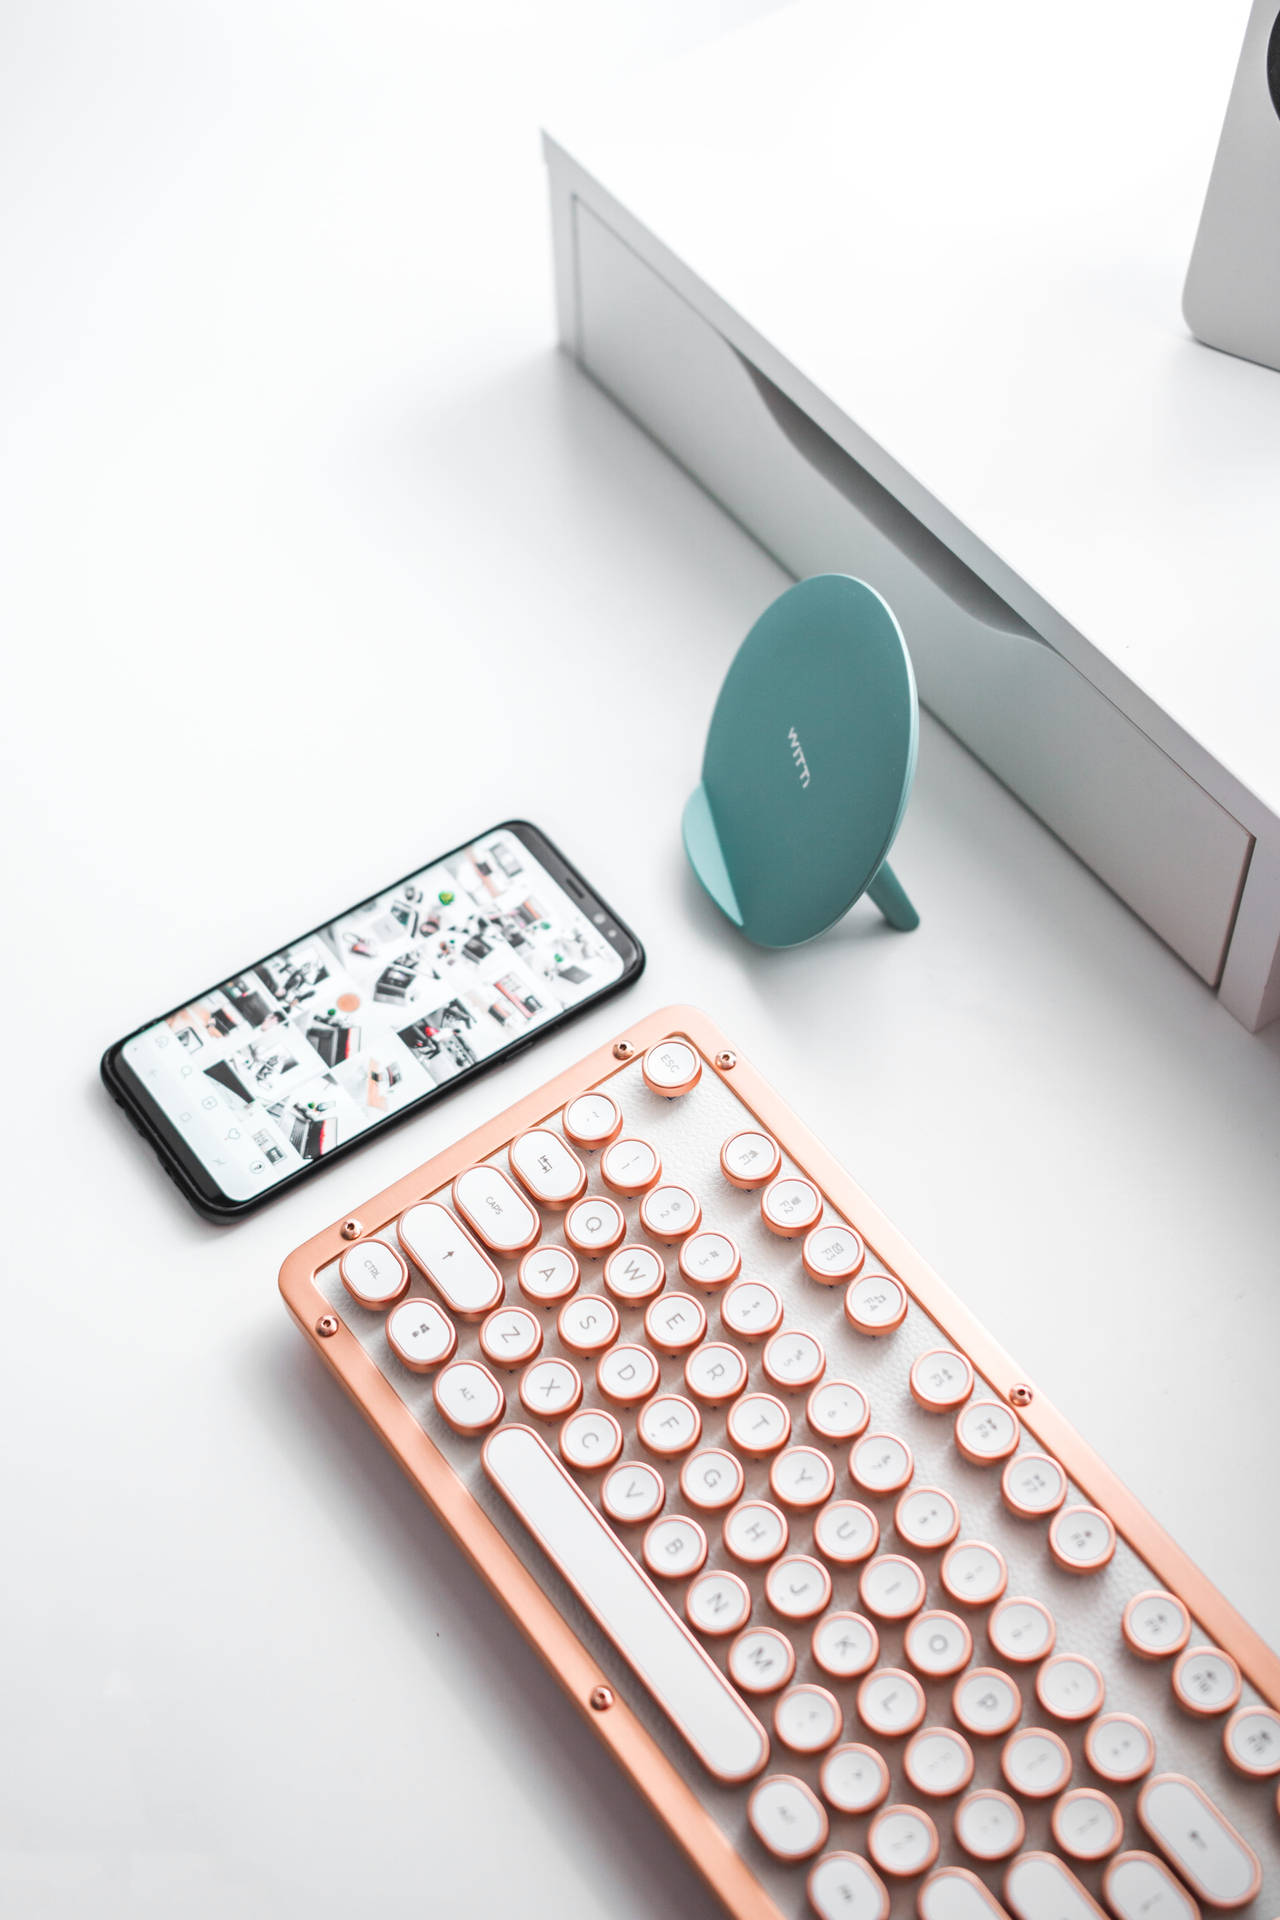 Clean Iphone Desk With Keyboard Wallpaper